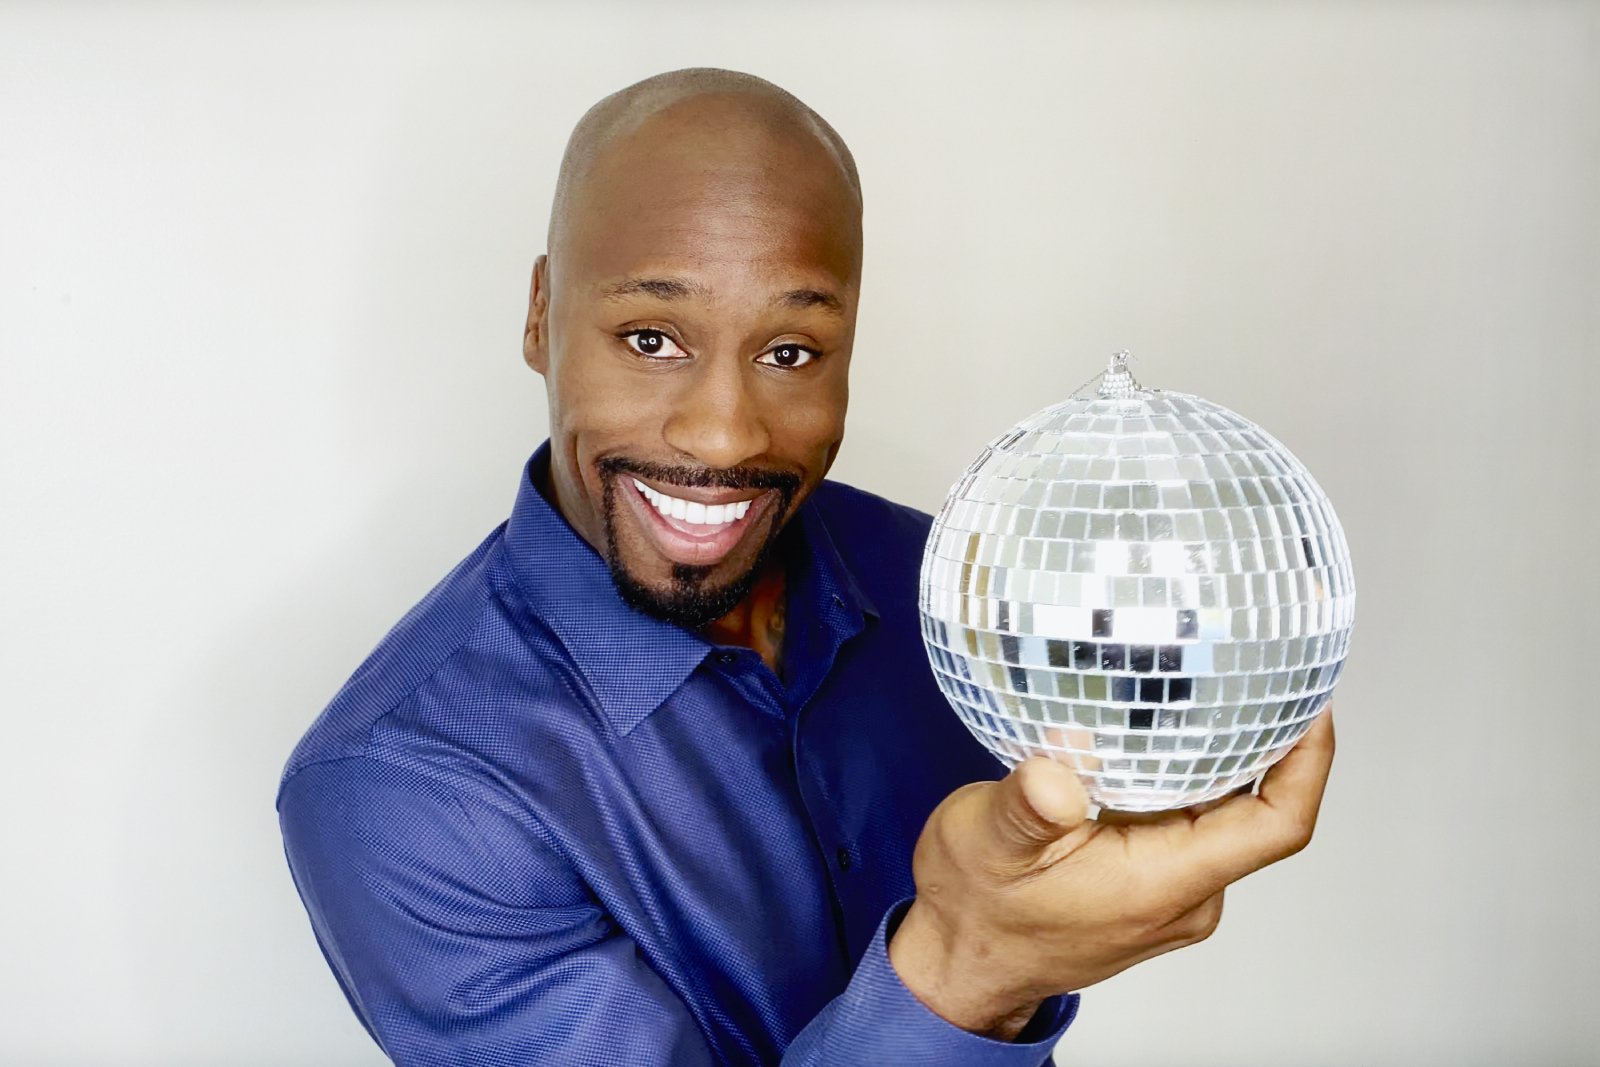 ‘Dancing With the Stars’: How Good Was Vernon Davis During His NFL Career?